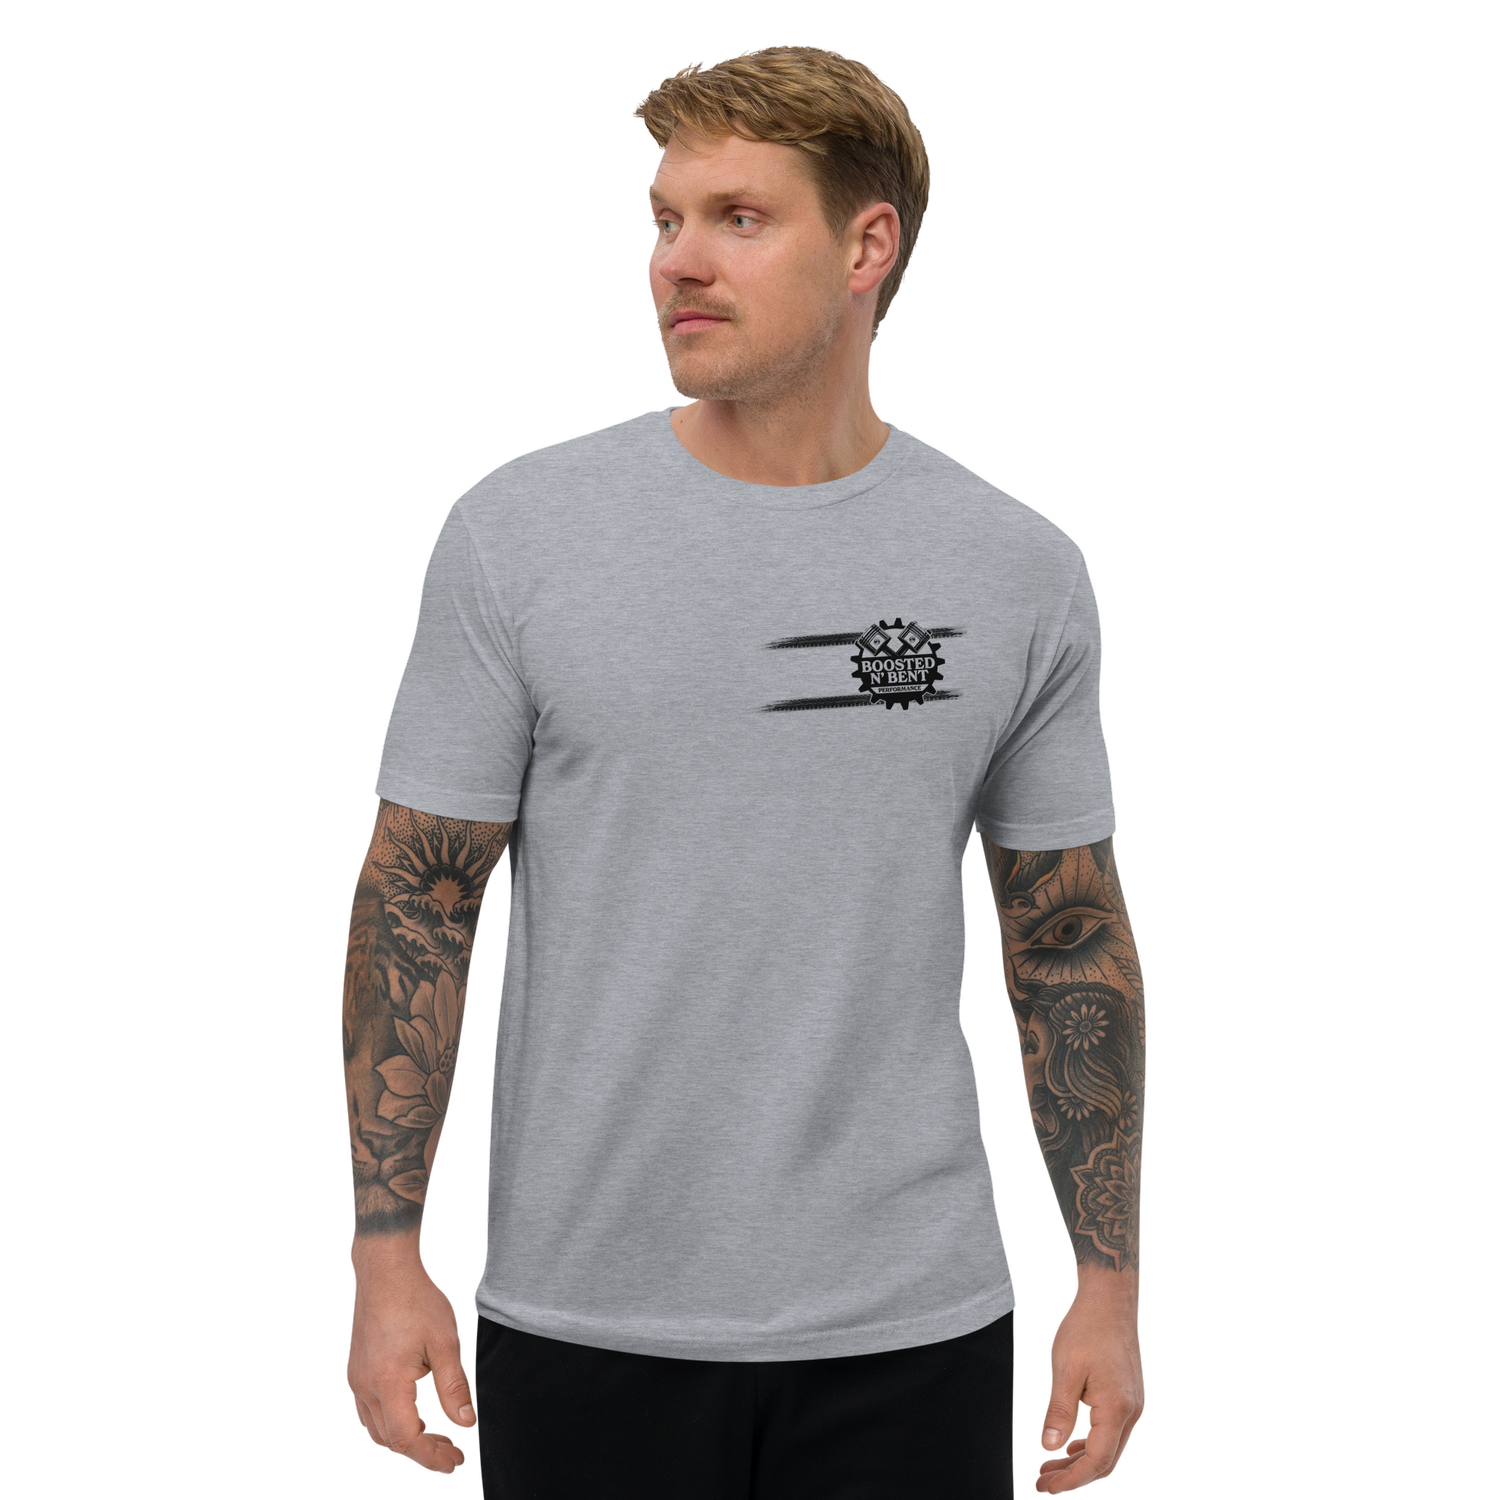 Men's Performance T-Shirts in Gray